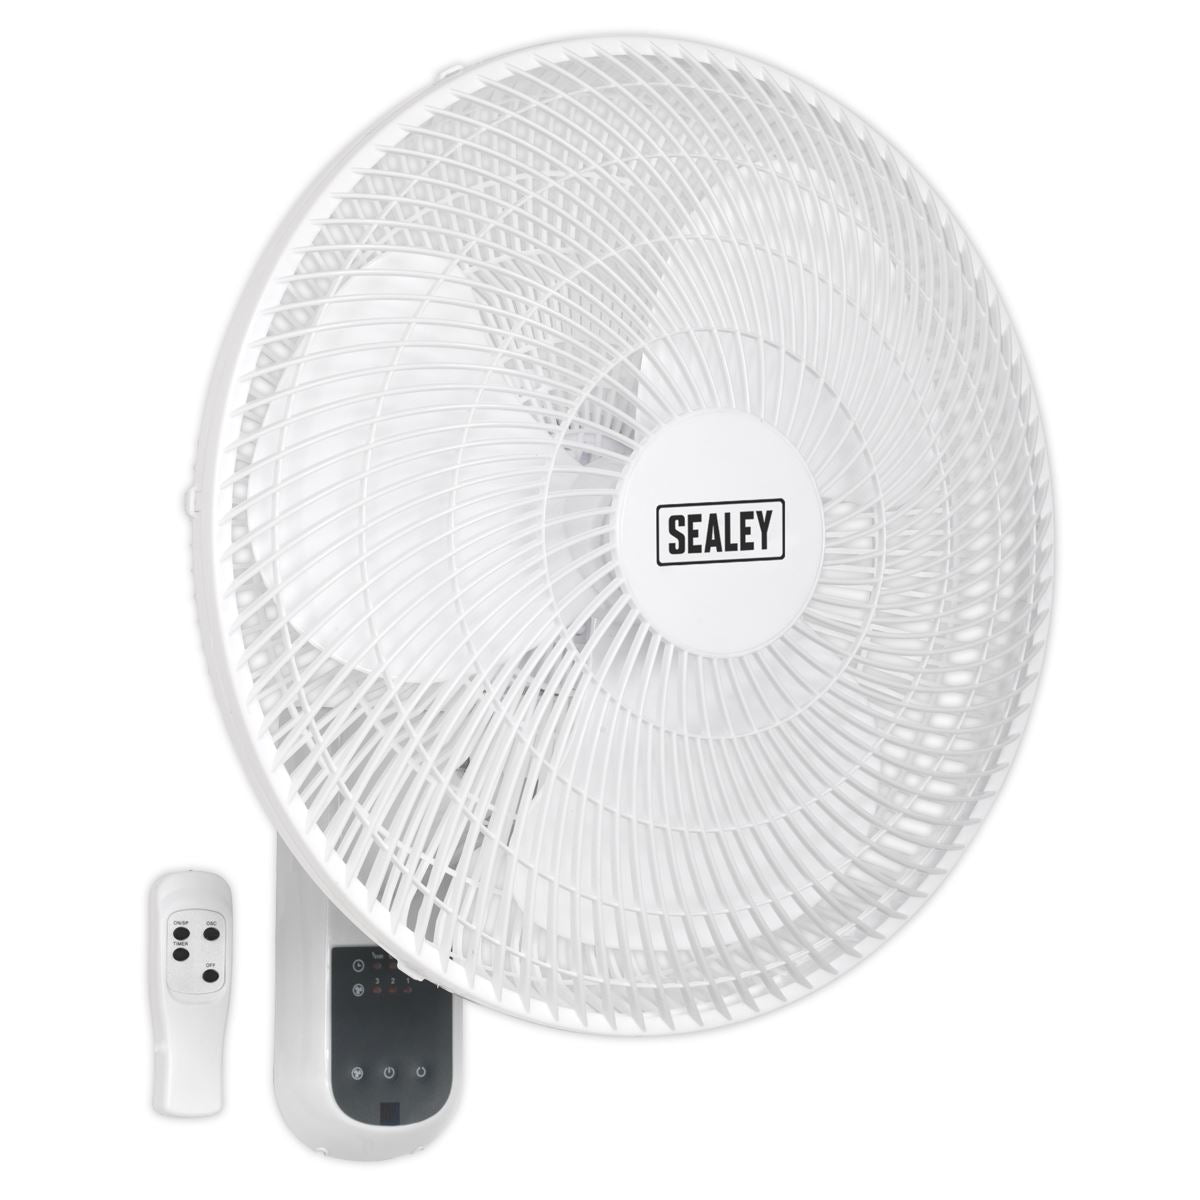 Sealey Wall Fan 3-Speed 16" with Remote Control 230V